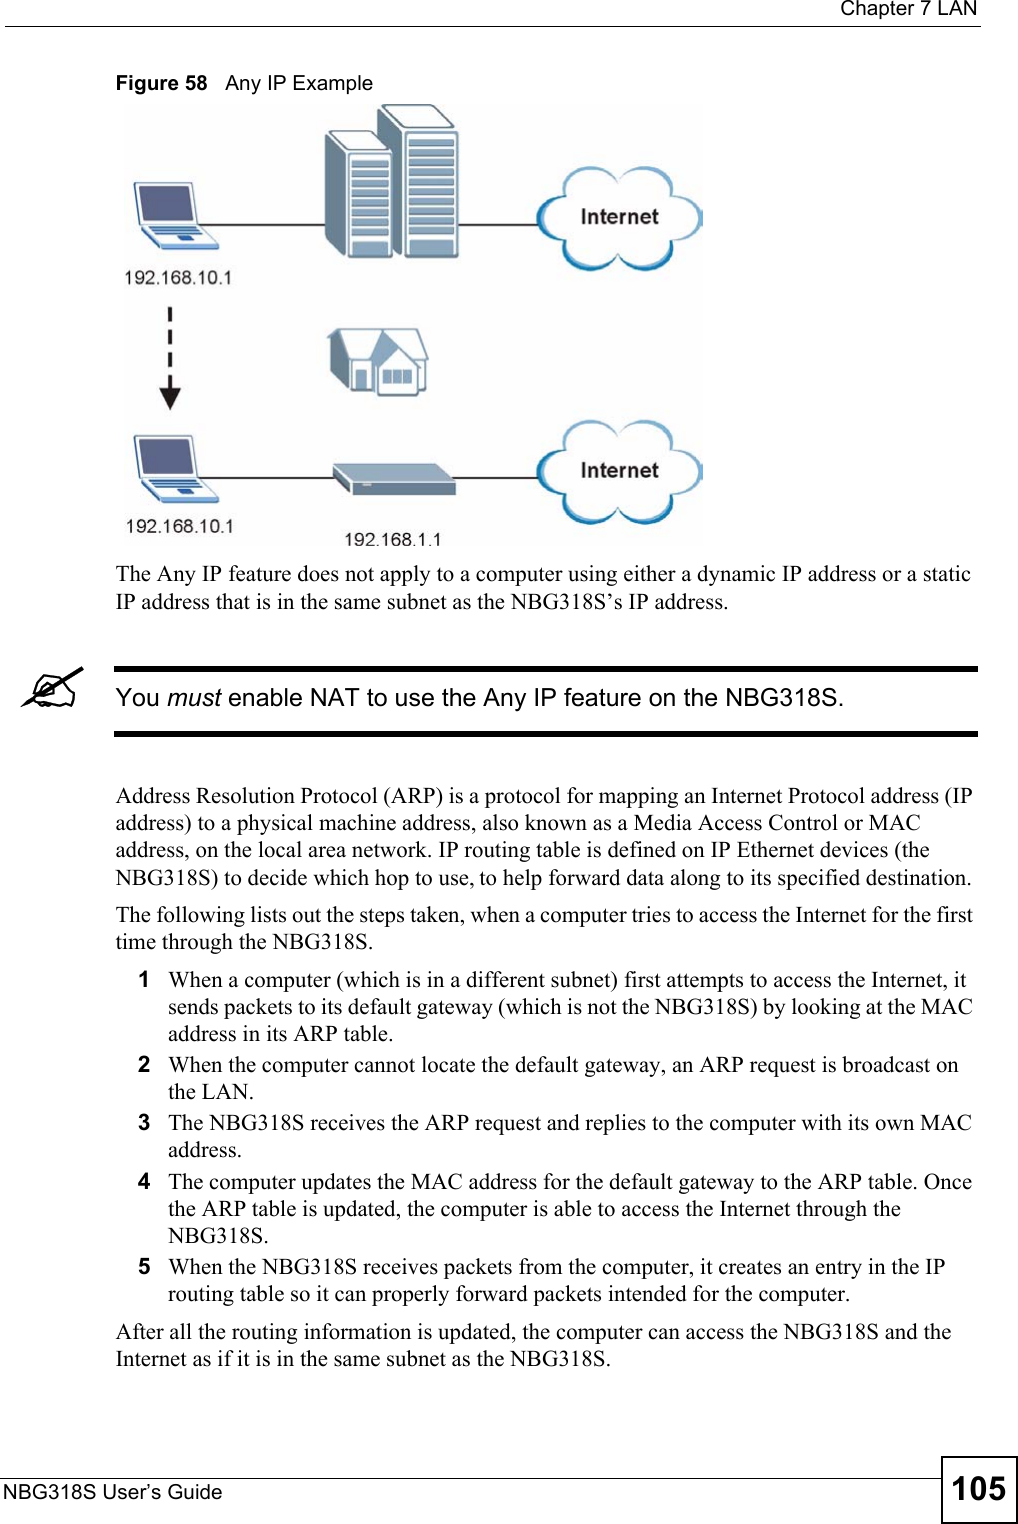  Chapter 7 LANNBG318S User’s Guide 105Figure 58   Any IP ExampleThe Any IP feature does not apply to a computer using either a dynamic IP address or a static IP address that is in the same subnet as the NBG318S’s IP address.&quot;You must enable NAT to use the Any IP feature on the NBG318S. Address Resolution Protocol (ARP) is a protocol for mapping an Internet Protocol address (IP address) to a physical machine address, also known as a Media Access Control or MAC address, on the local area network. IP routing table is defined on IP Ethernet devices (the NBG318S) to decide which hop to use, to help forward data along to its specified destination.The following lists out the steps taken, when a computer tries to access the Internet for the first time through the NBG318S.1When a computer (which is in a different subnet) first attempts to access the Internet, it sends packets to its default gateway (which is not the NBG318S) by looking at the MAC address in its ARP table. 2When the computer cannot locate the default gateway, an ARP request is broadcast on the LAN. 3The NBG318S receives the ARP request and replies to the computer with its own MAC address. 4The computer updates the MAC address for the default gateway to the ARP table. Once the ARP table is updated, the computer is able to access the Internet through the NBG318S. 5When the NBG318S receives packets from the computer, it creates an entry in the IP routing table so it can properly forward packets intended for the computer. After all the routing information is updated, the computer can access the NBG318S and the Internet as if it is in the same subnet as the NBG318S. 